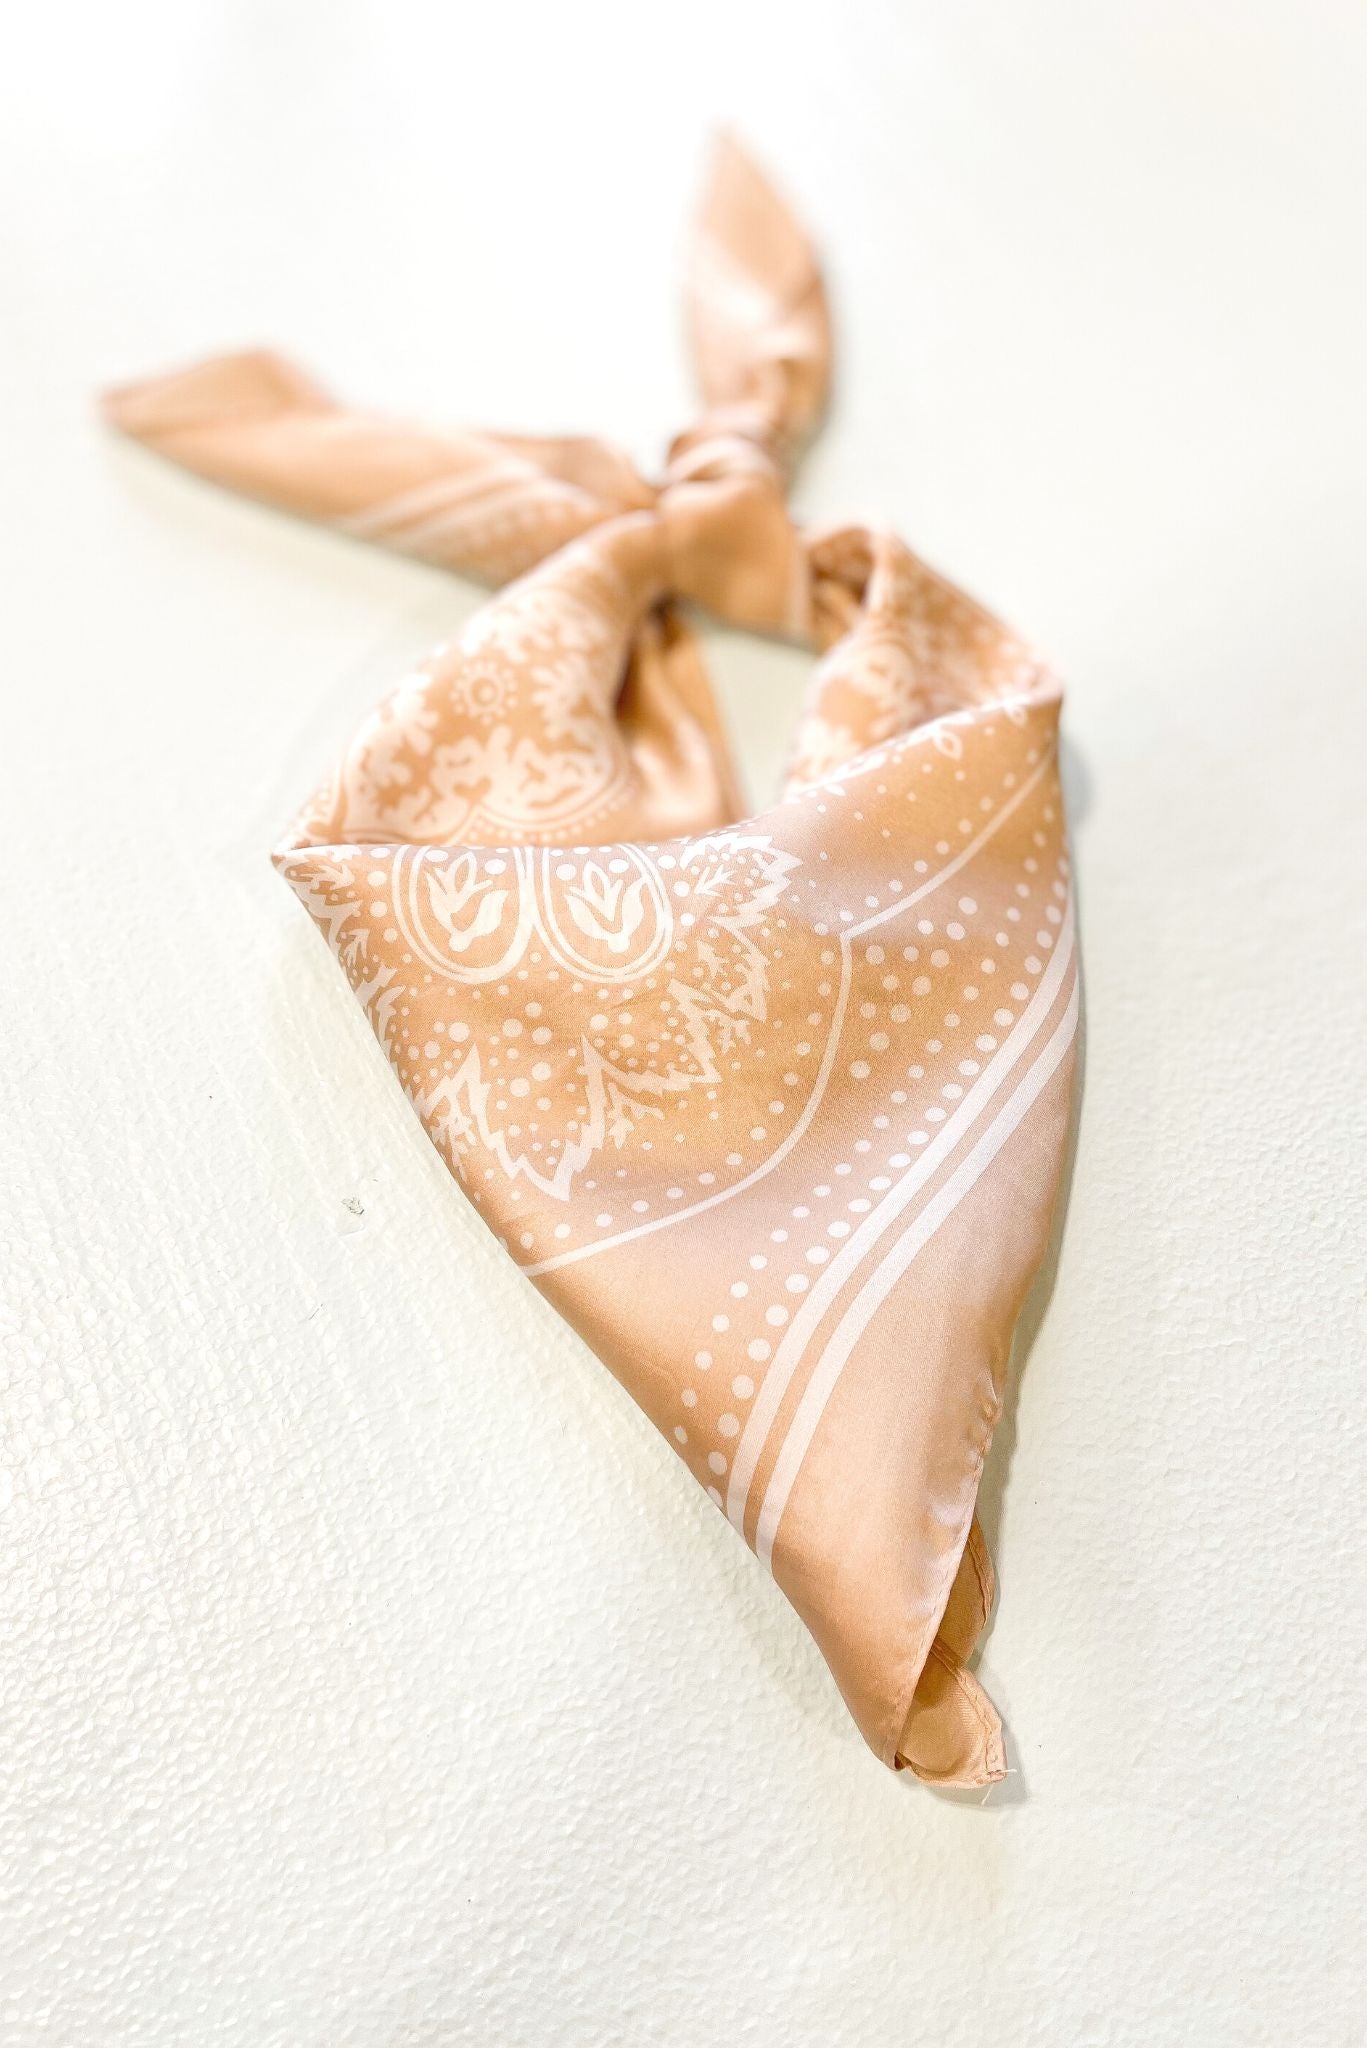 Ivory Satin Bandana Print Scarf, summer essentials, easy accessory, mom style, shop style your senses by Mallory Fitzsimmons